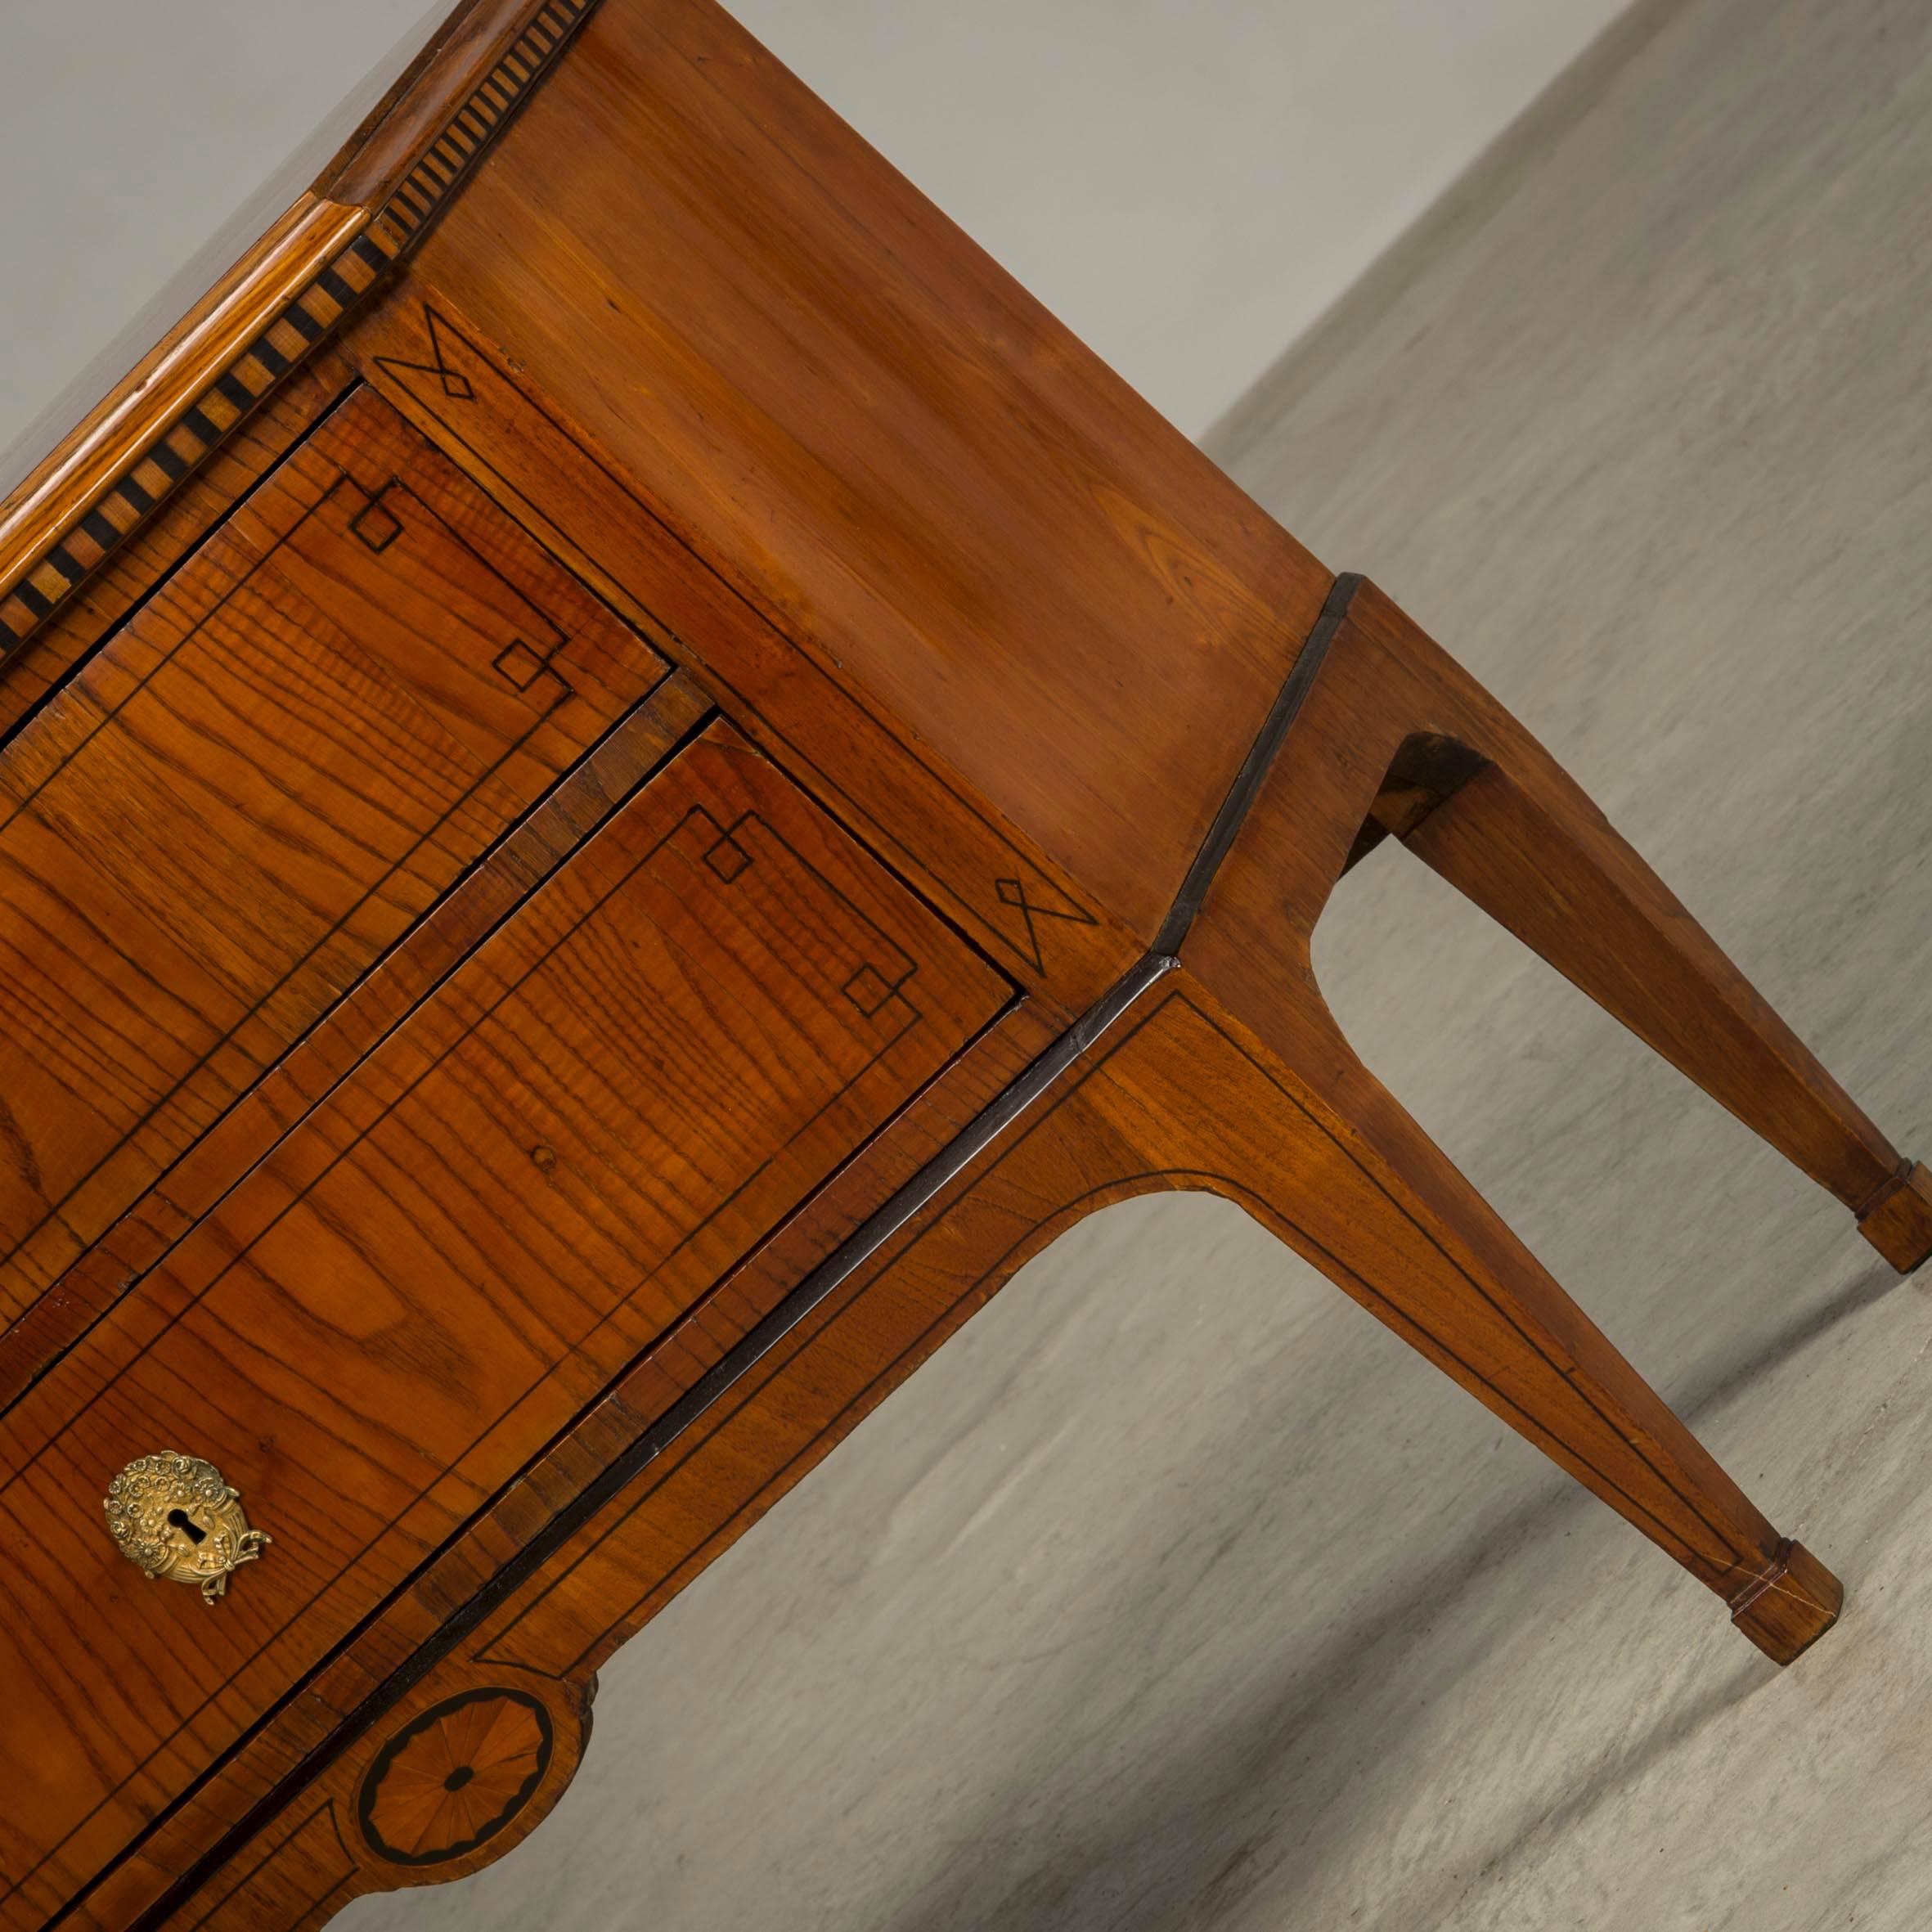 A Danish Louis XVI elm and inlaid commode, late 18th-early 19th century, the rectangular top with a molded edge above a dentil molded frieze, with two long drawers bordered with line inlay and with a lower inlaid fan medallion, raised on square